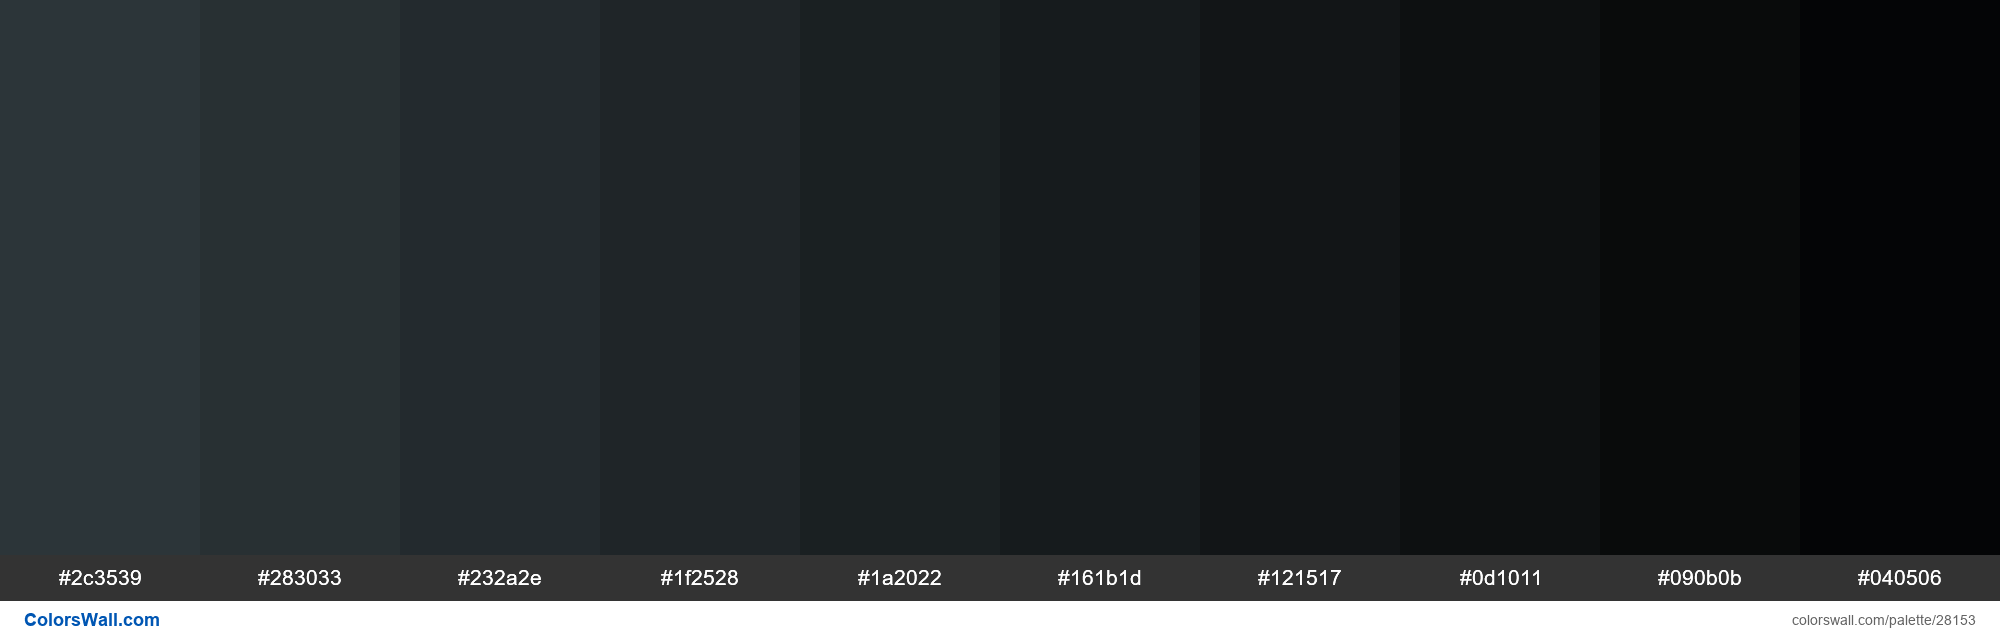 colorswall on X: Shades of Gunmetal color #2C3539 hex #2c3539